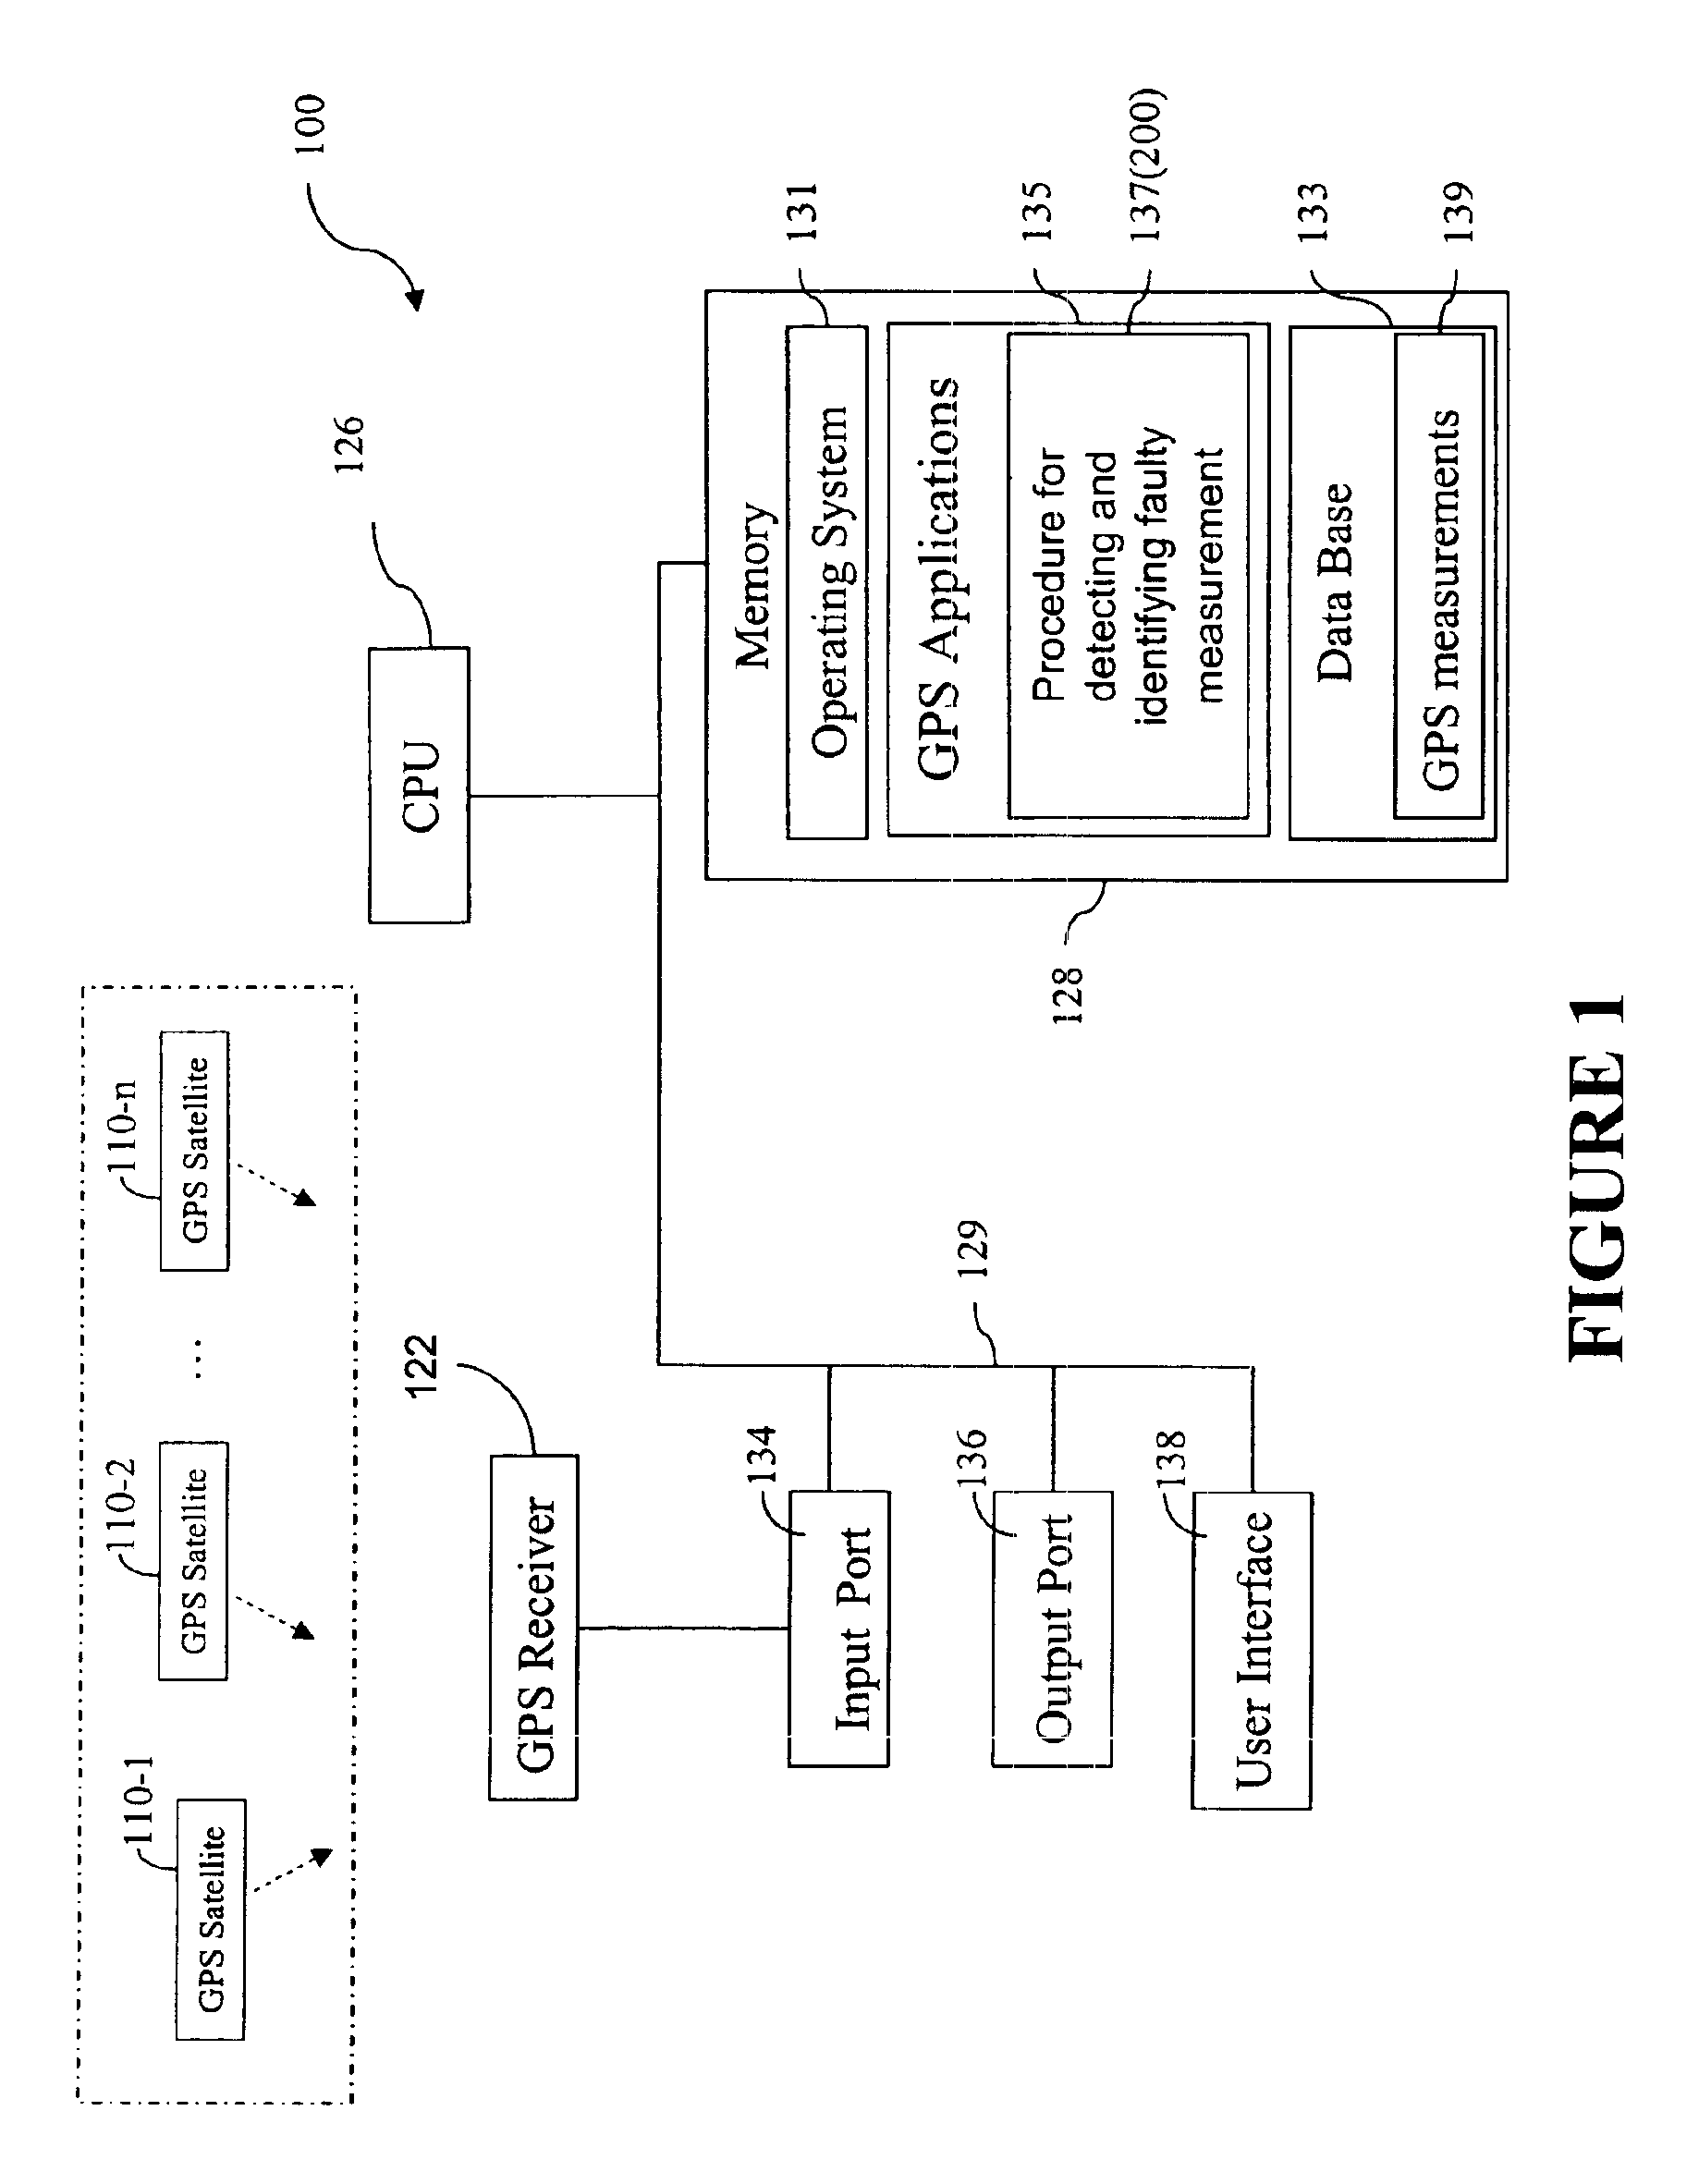 Method for receiver autonomous integrity monitoring and fault detection and elimination